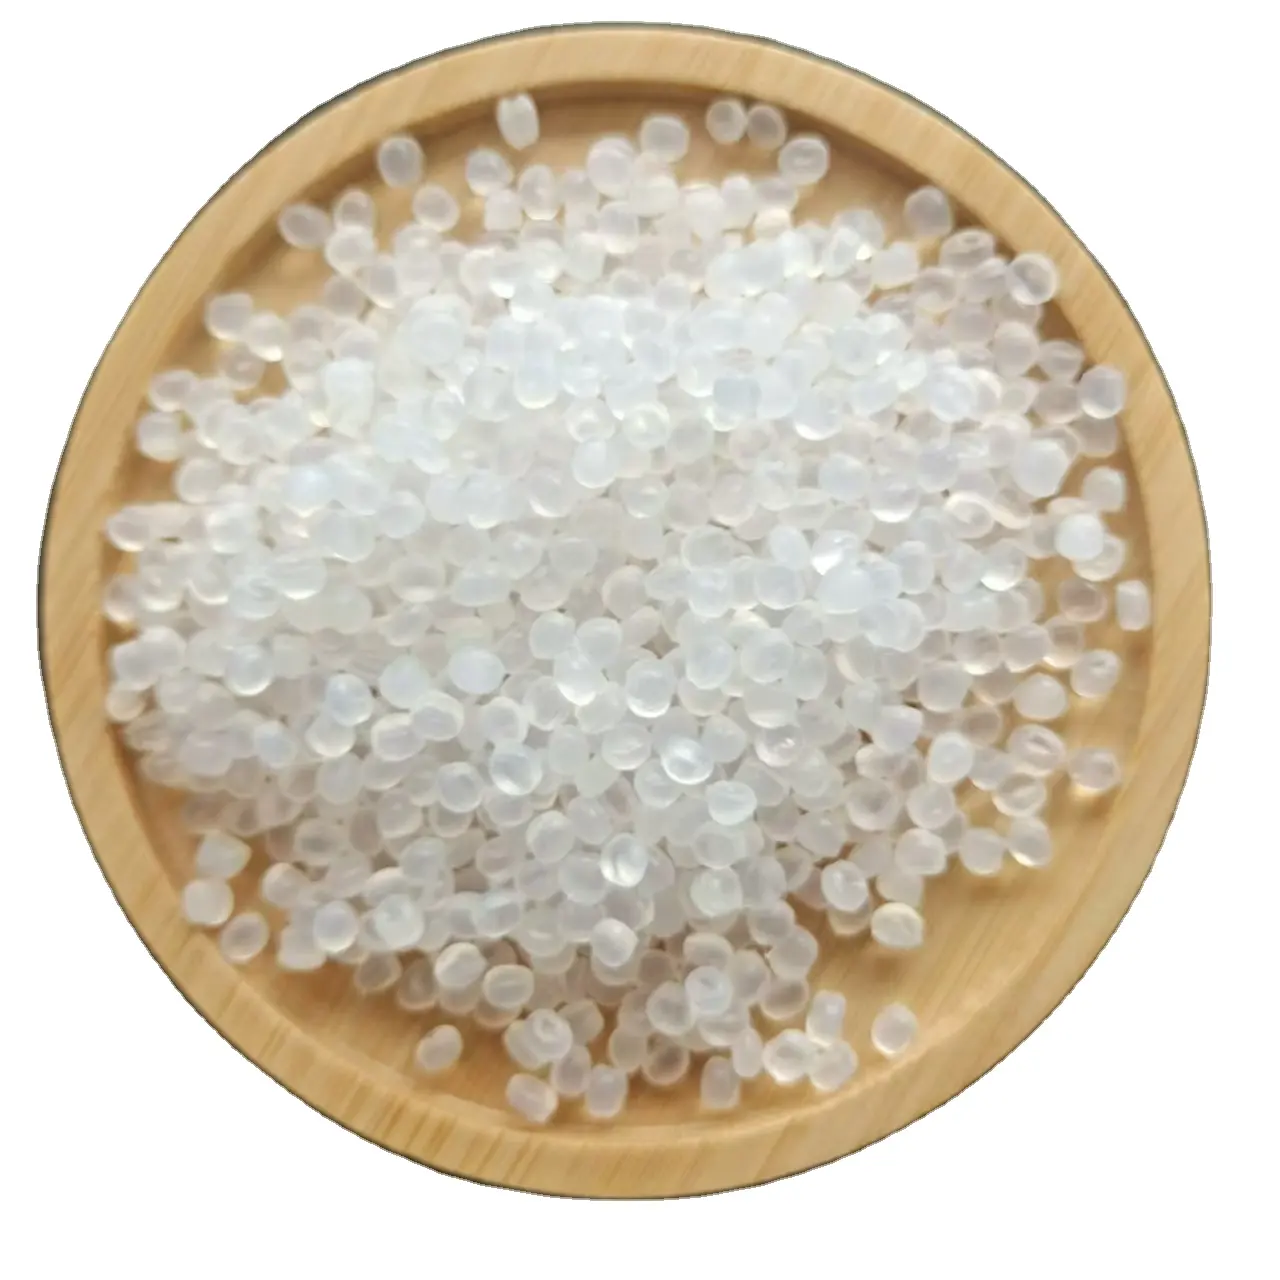 HDPE BE-2000粒子原料リサイクルHDPE/LDPE/LLDPE/PP/ABS/PS粒子プラスチック原料